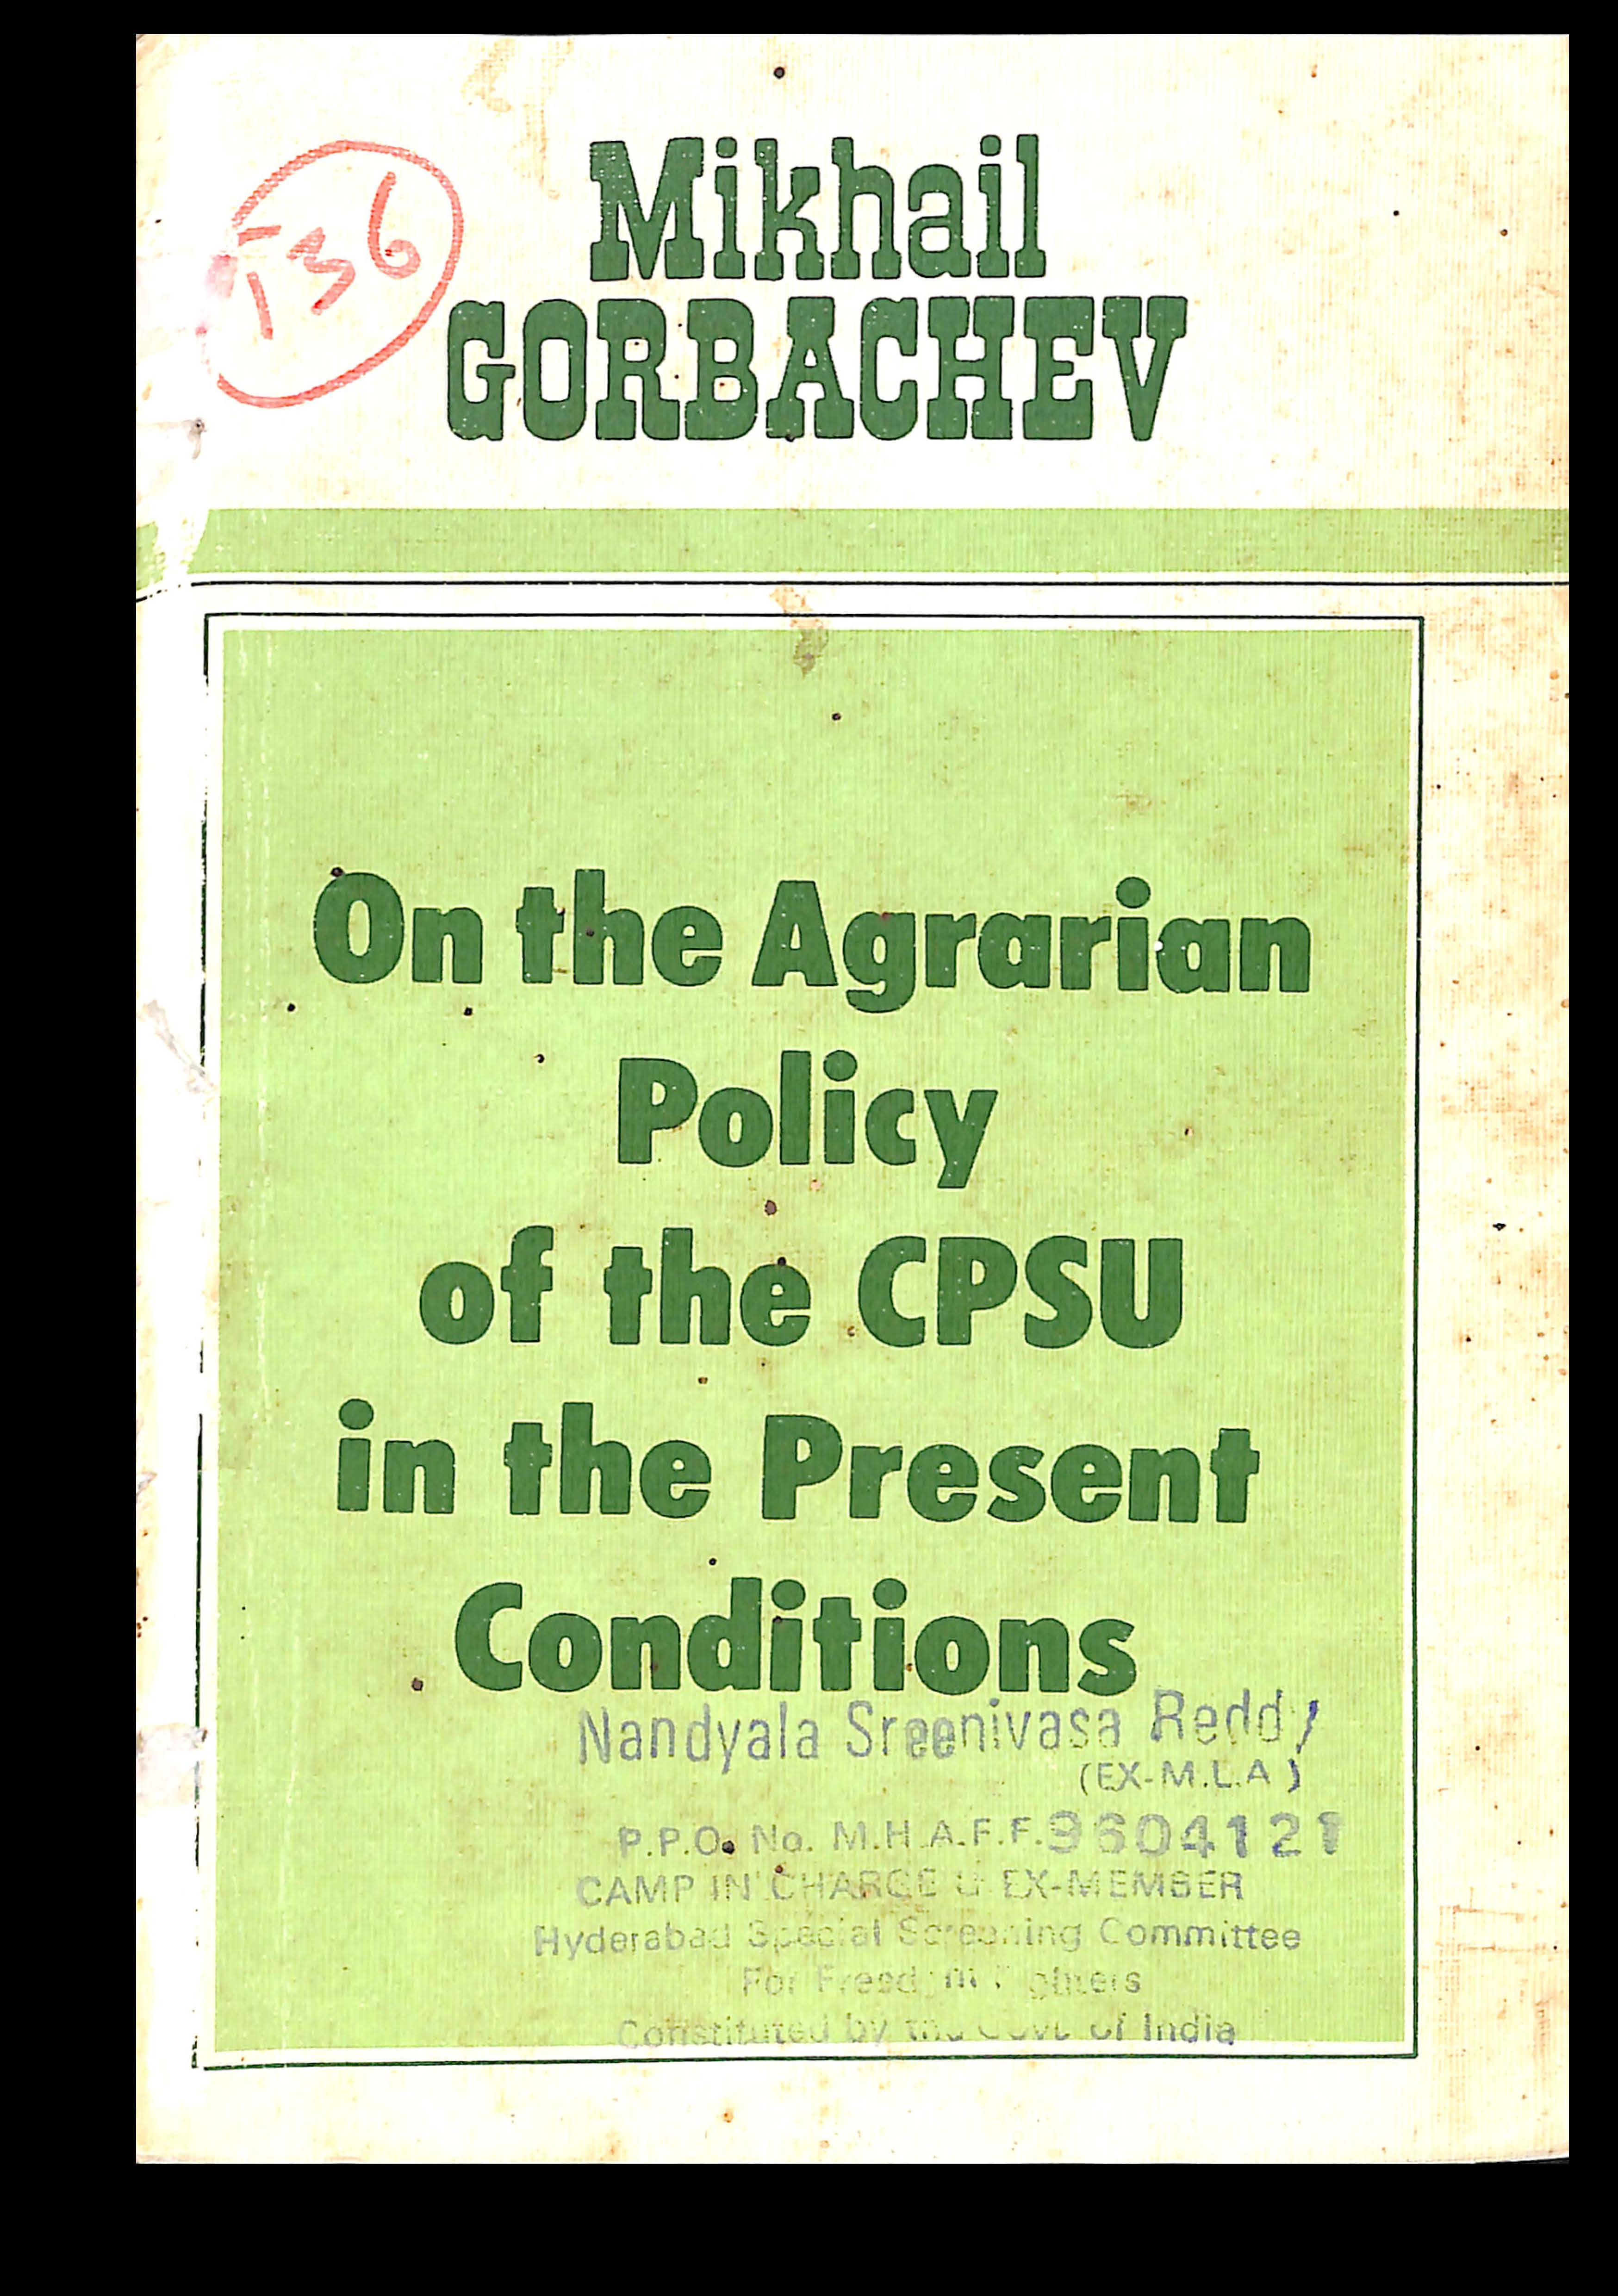 On The Agrarian Policy Of The CPSU In The Present Conditions